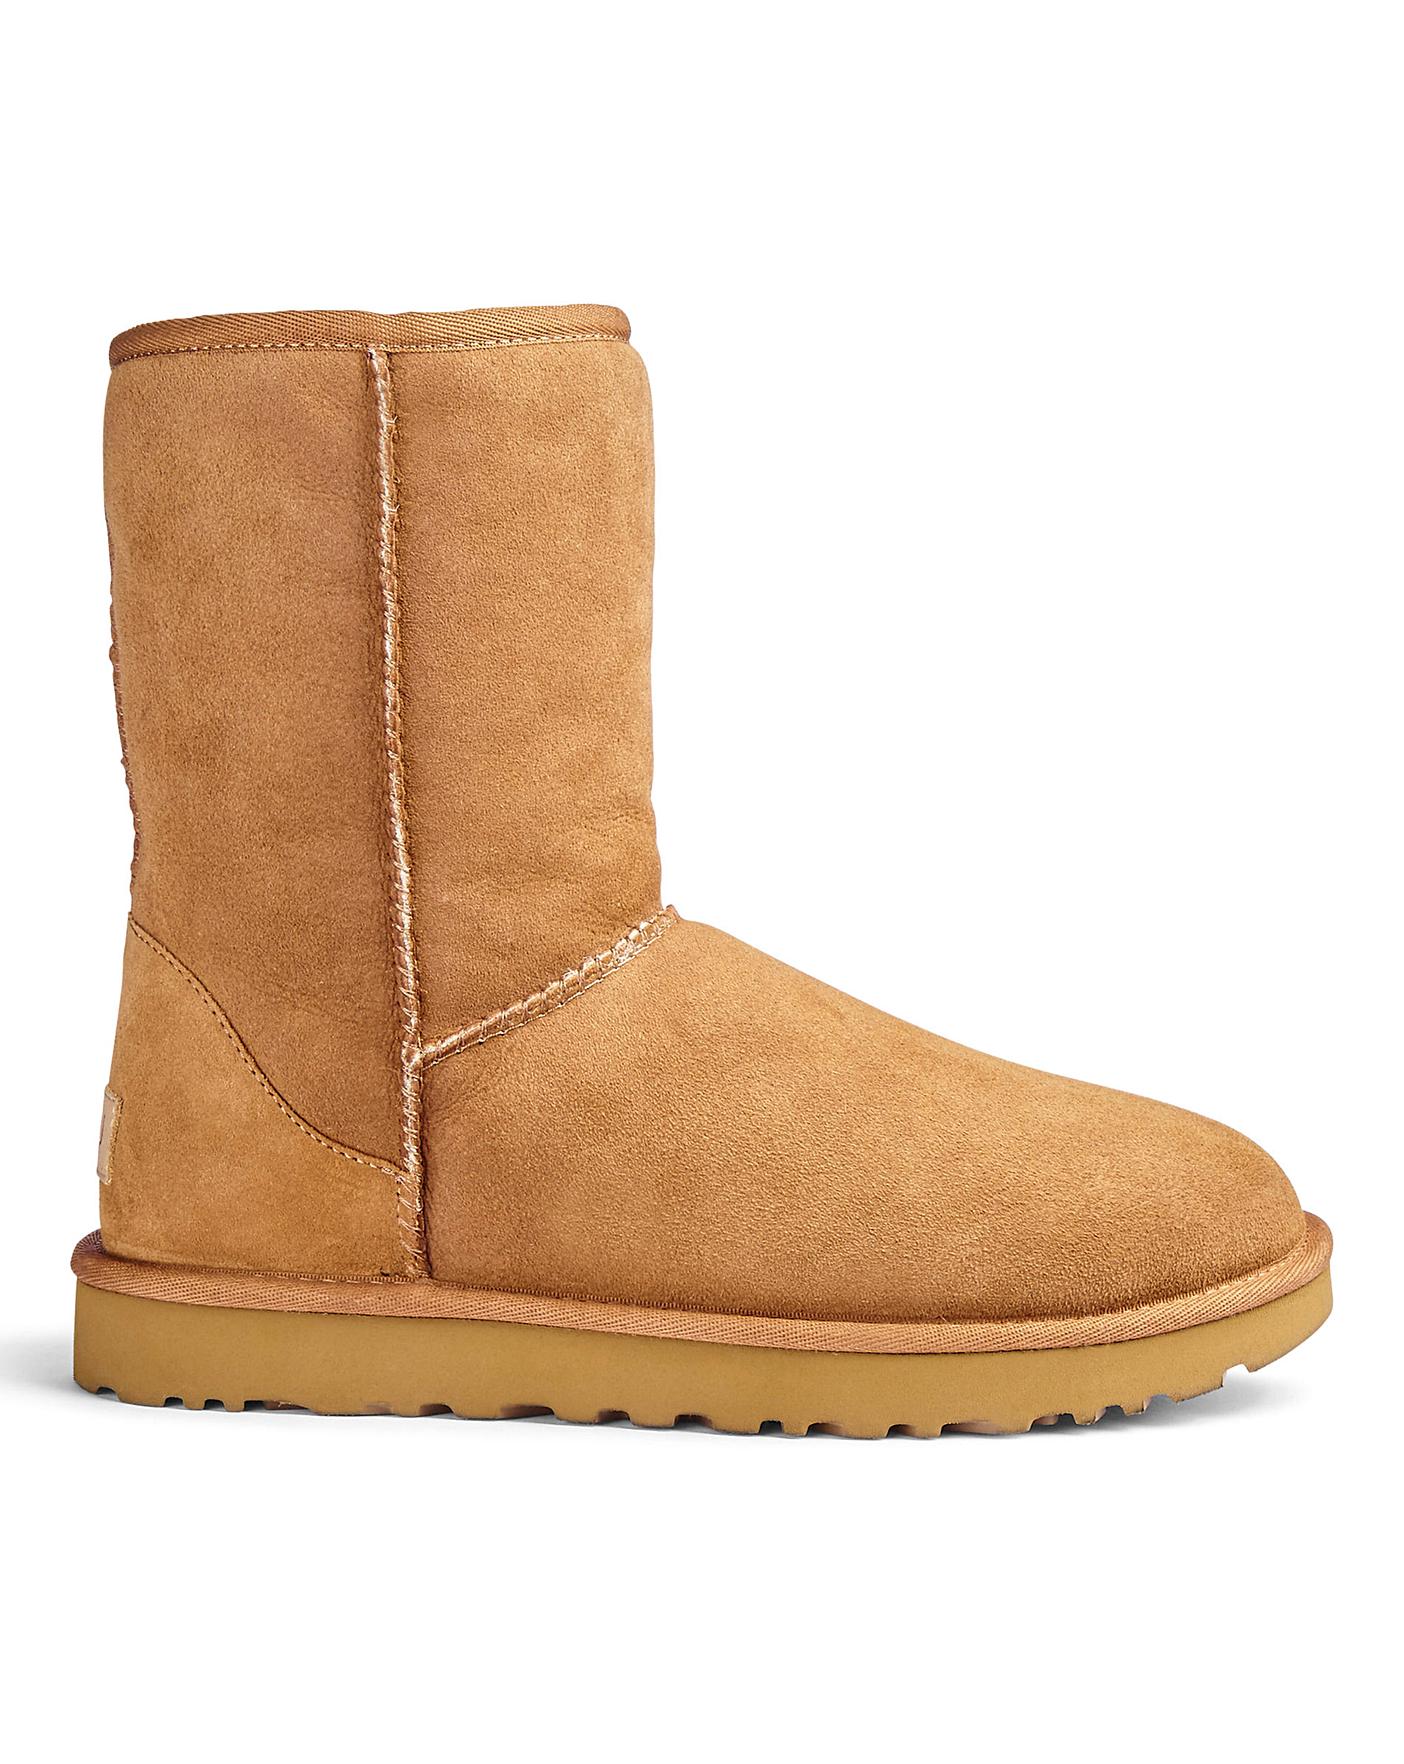 Ugg Classic Short II Boots | Simply Be